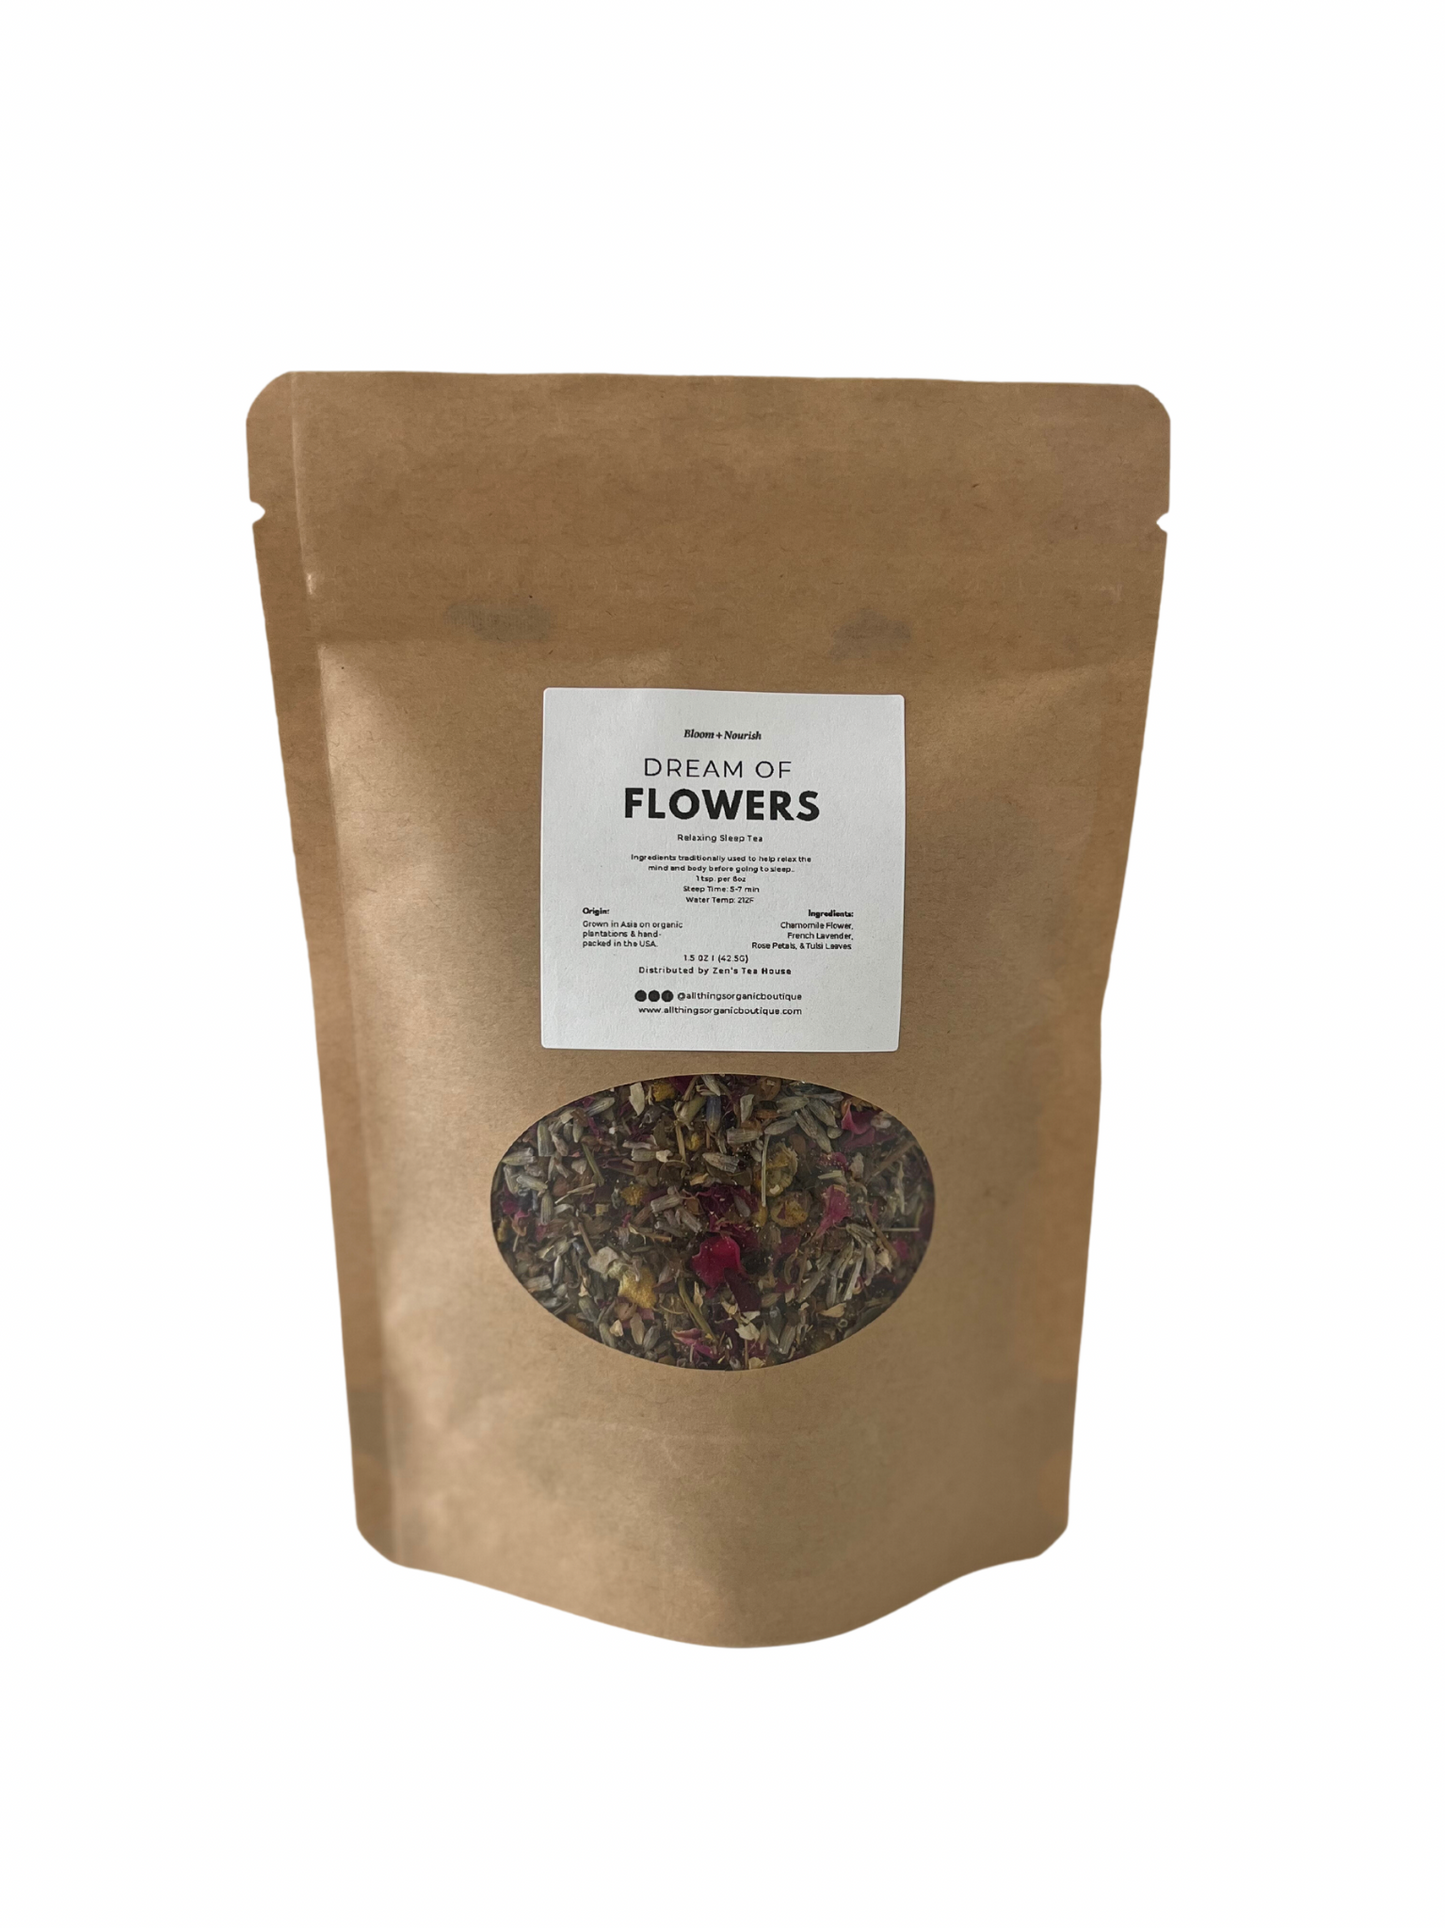 Dream of Flowers Organic Loose Leaf Tea is the #1 tea for sleepless nights! It contains a perfectly balanced mixture of sedative herbs and flowers. Chamomile Flower, Rose Petals, French Lavender, and Tulsi Leaves are the main ingredients from this relaxing blend.